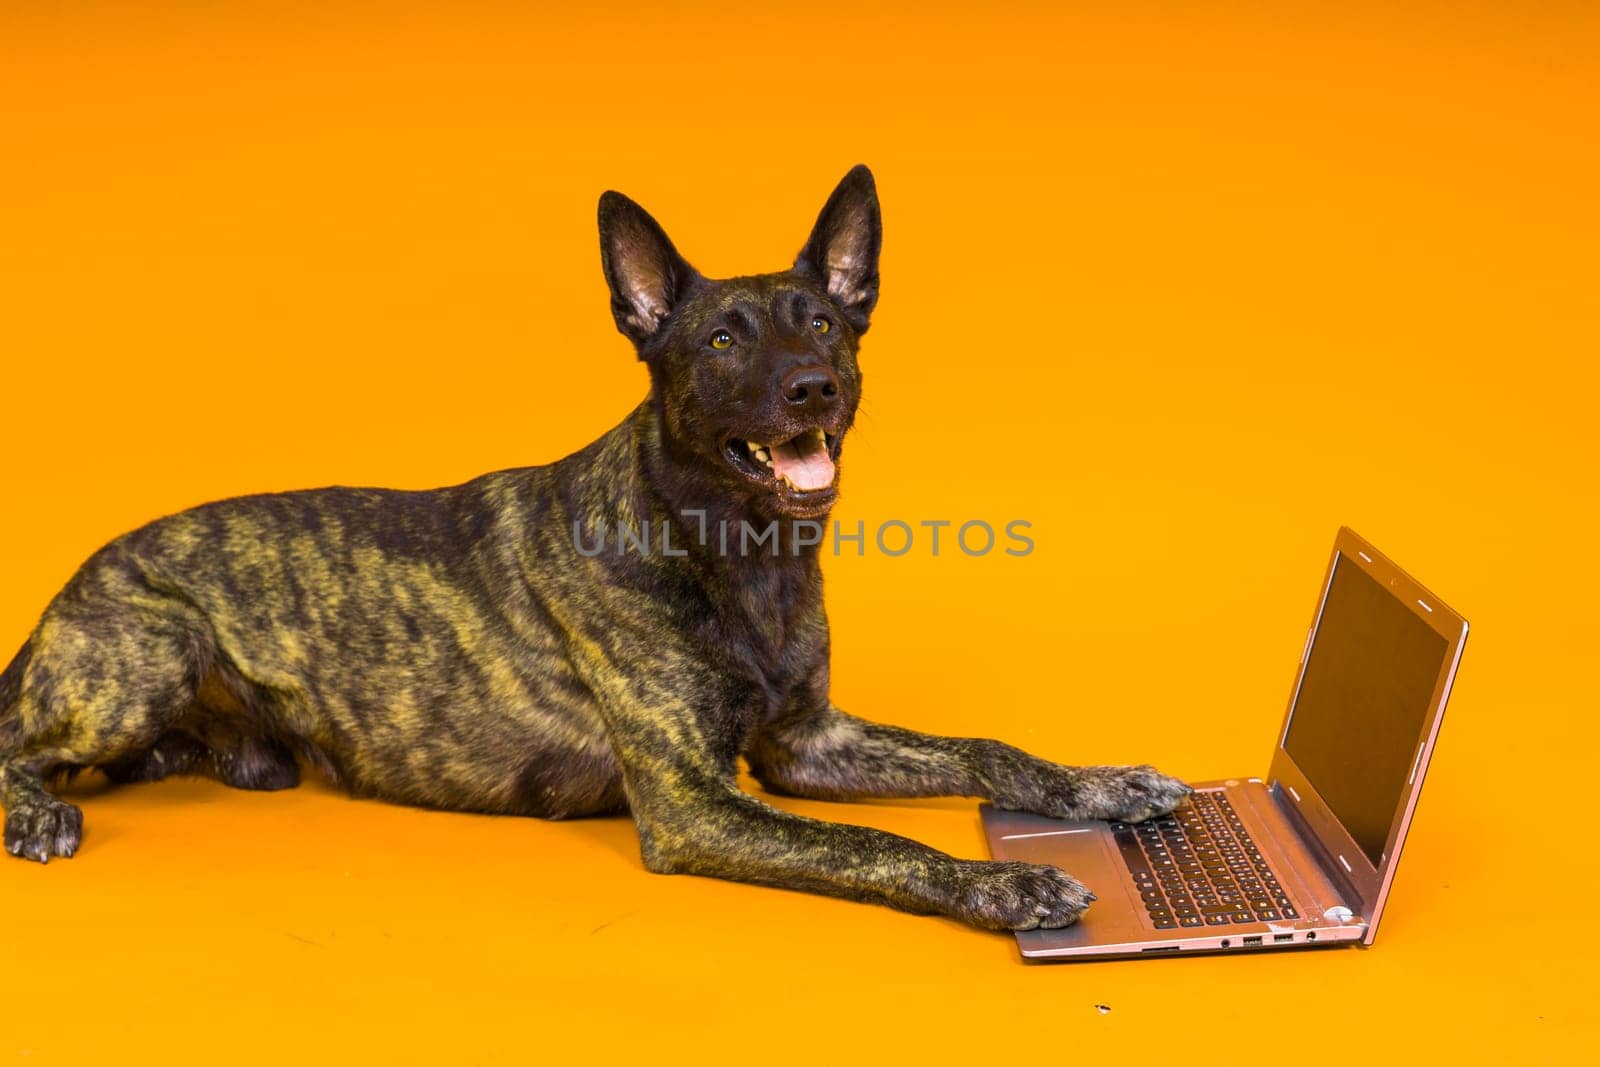 A bossy looking dog Dutch shepherd at computer. Concept of a strict manager, office related humor